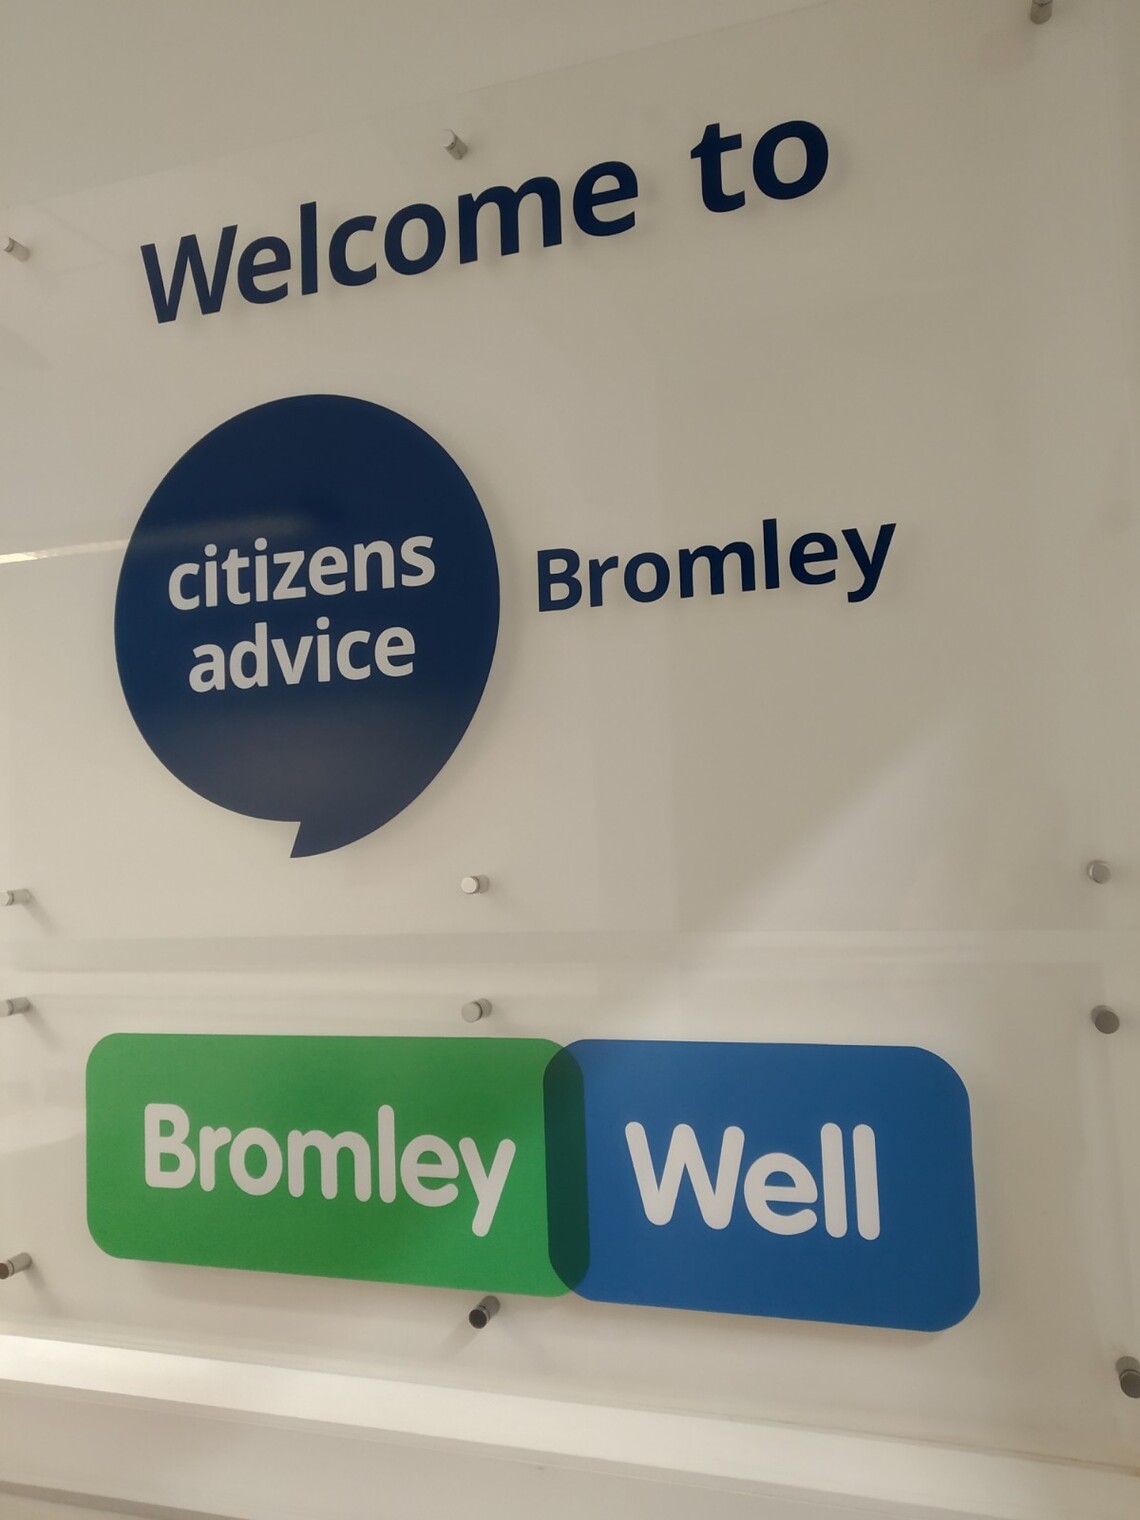 signage for Citizens Advice and Bromley well